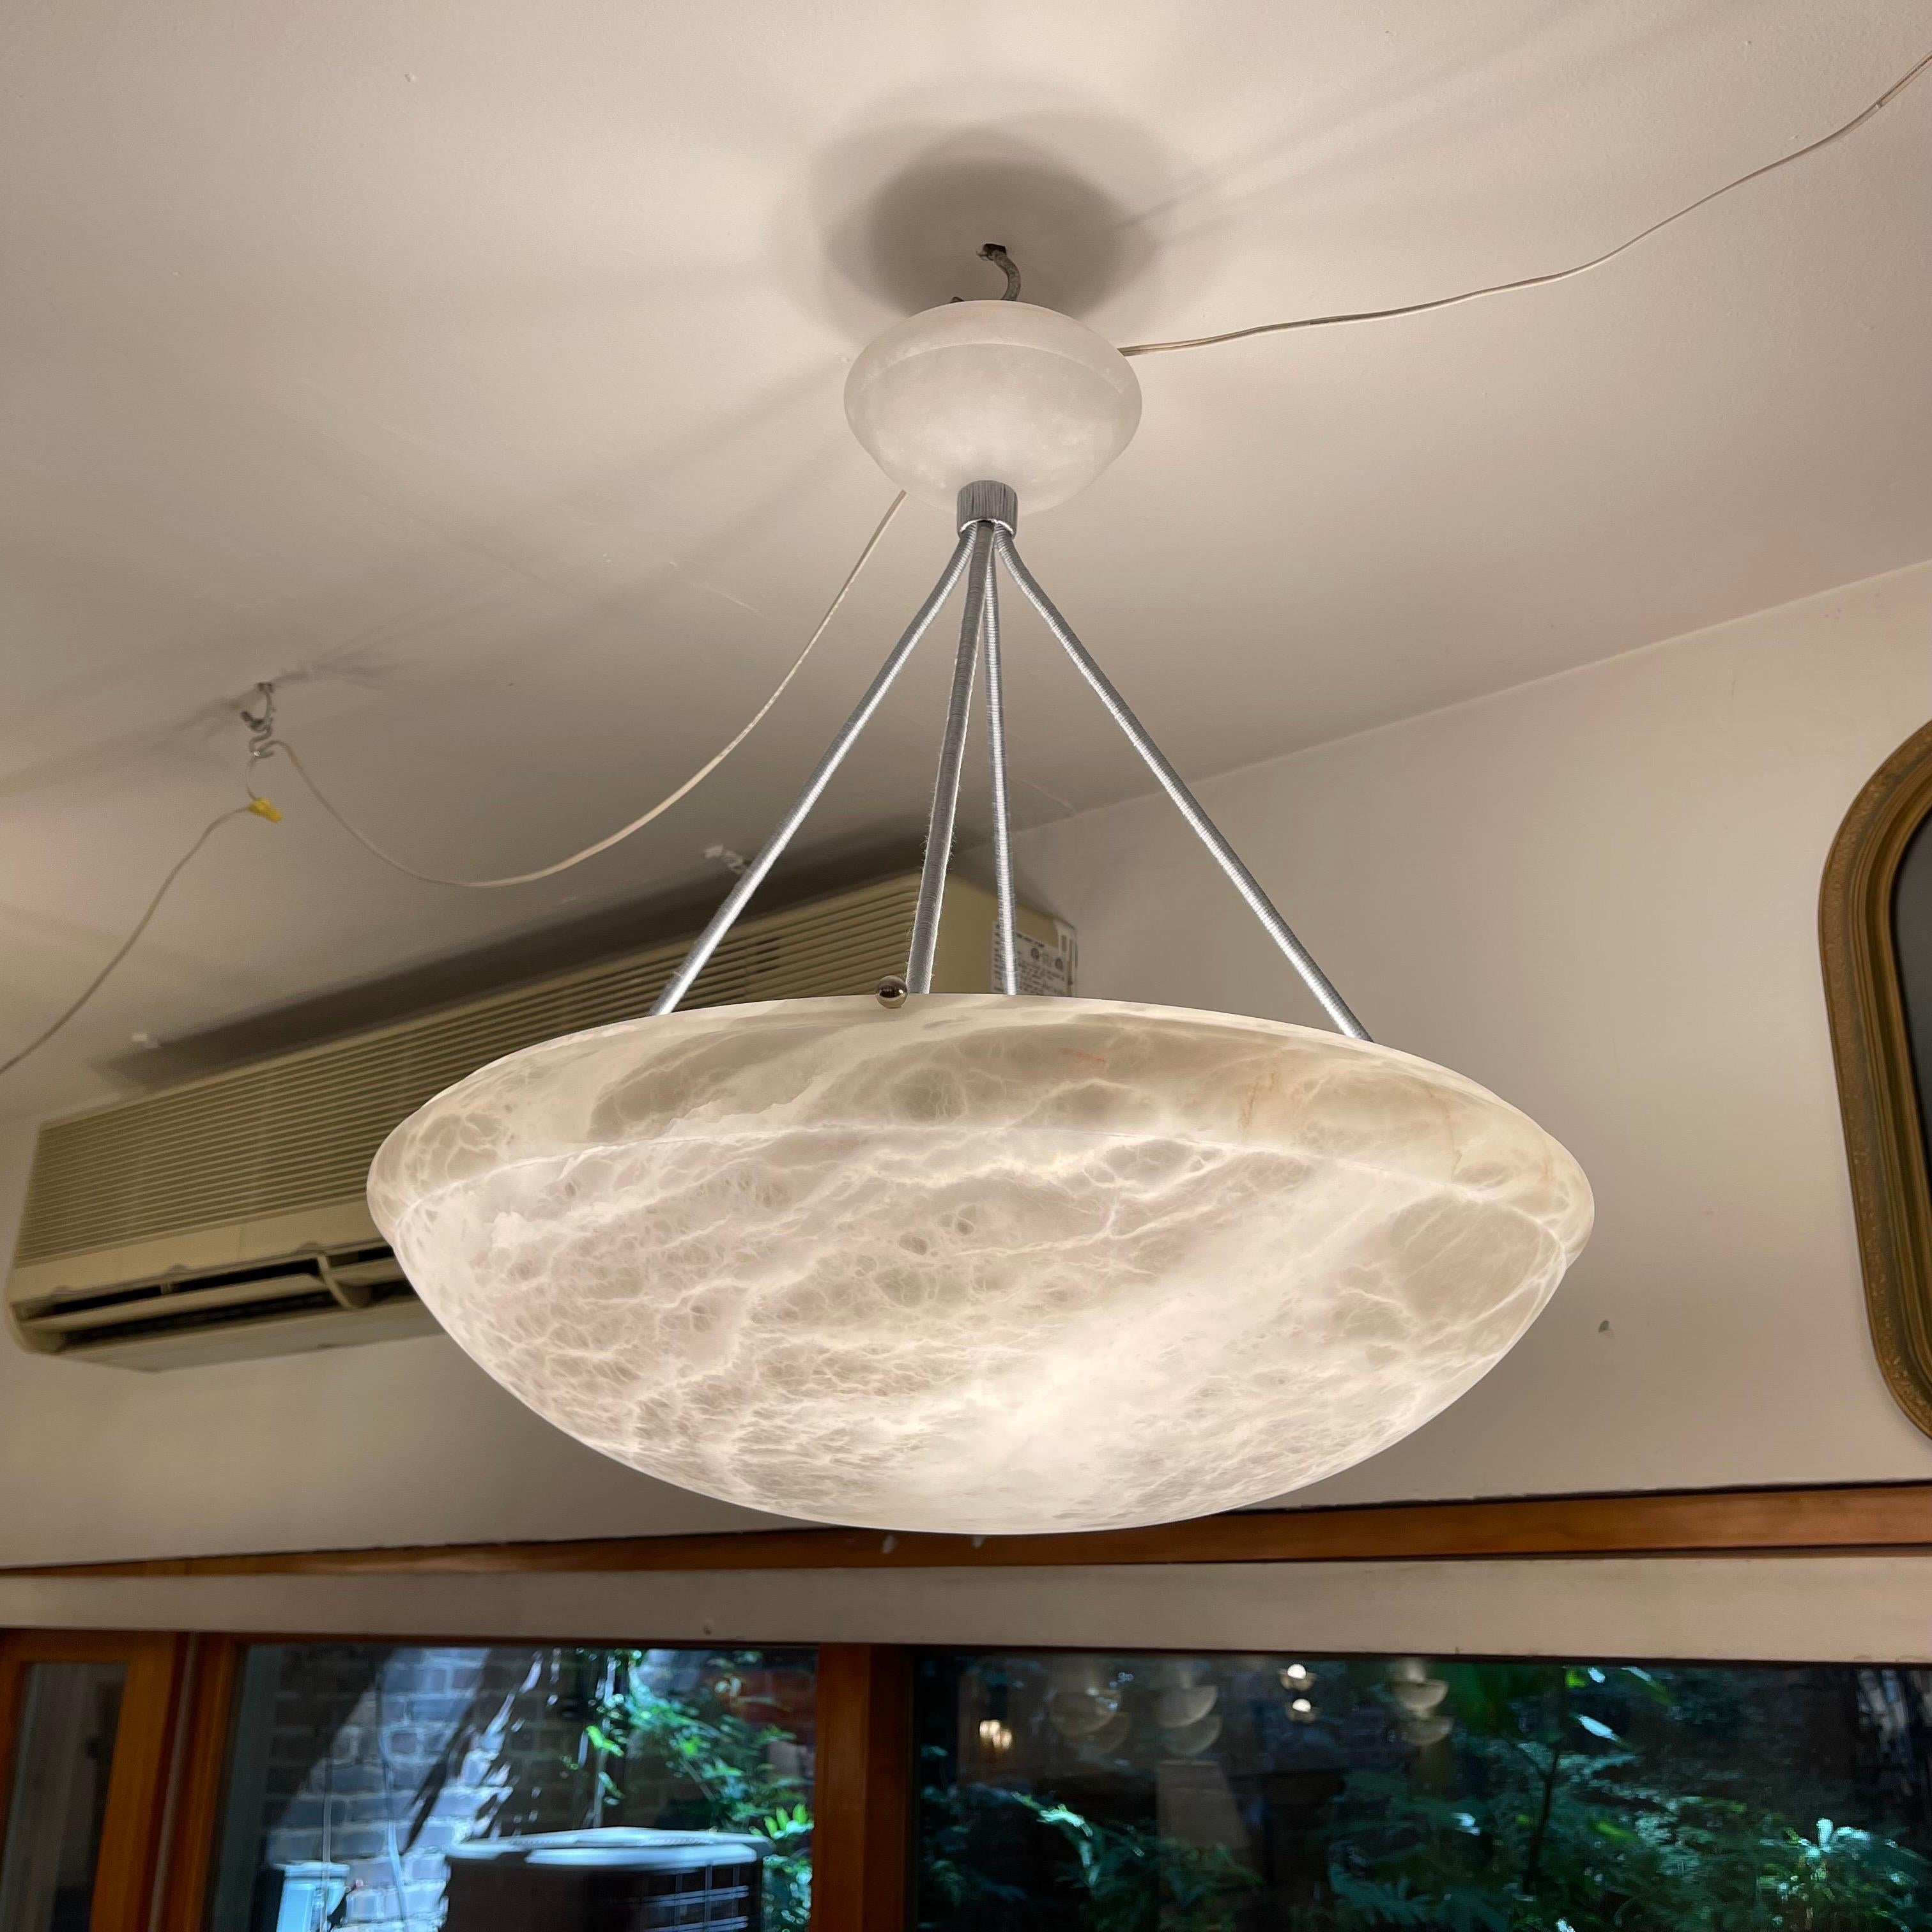 Pure white stone shows beautiful mineralization throughout the shade as well as the matching canopy. The drop may be customized at no additional charge, and the fixture mounts four standard bulbs. Purchase price includes customization if desired,